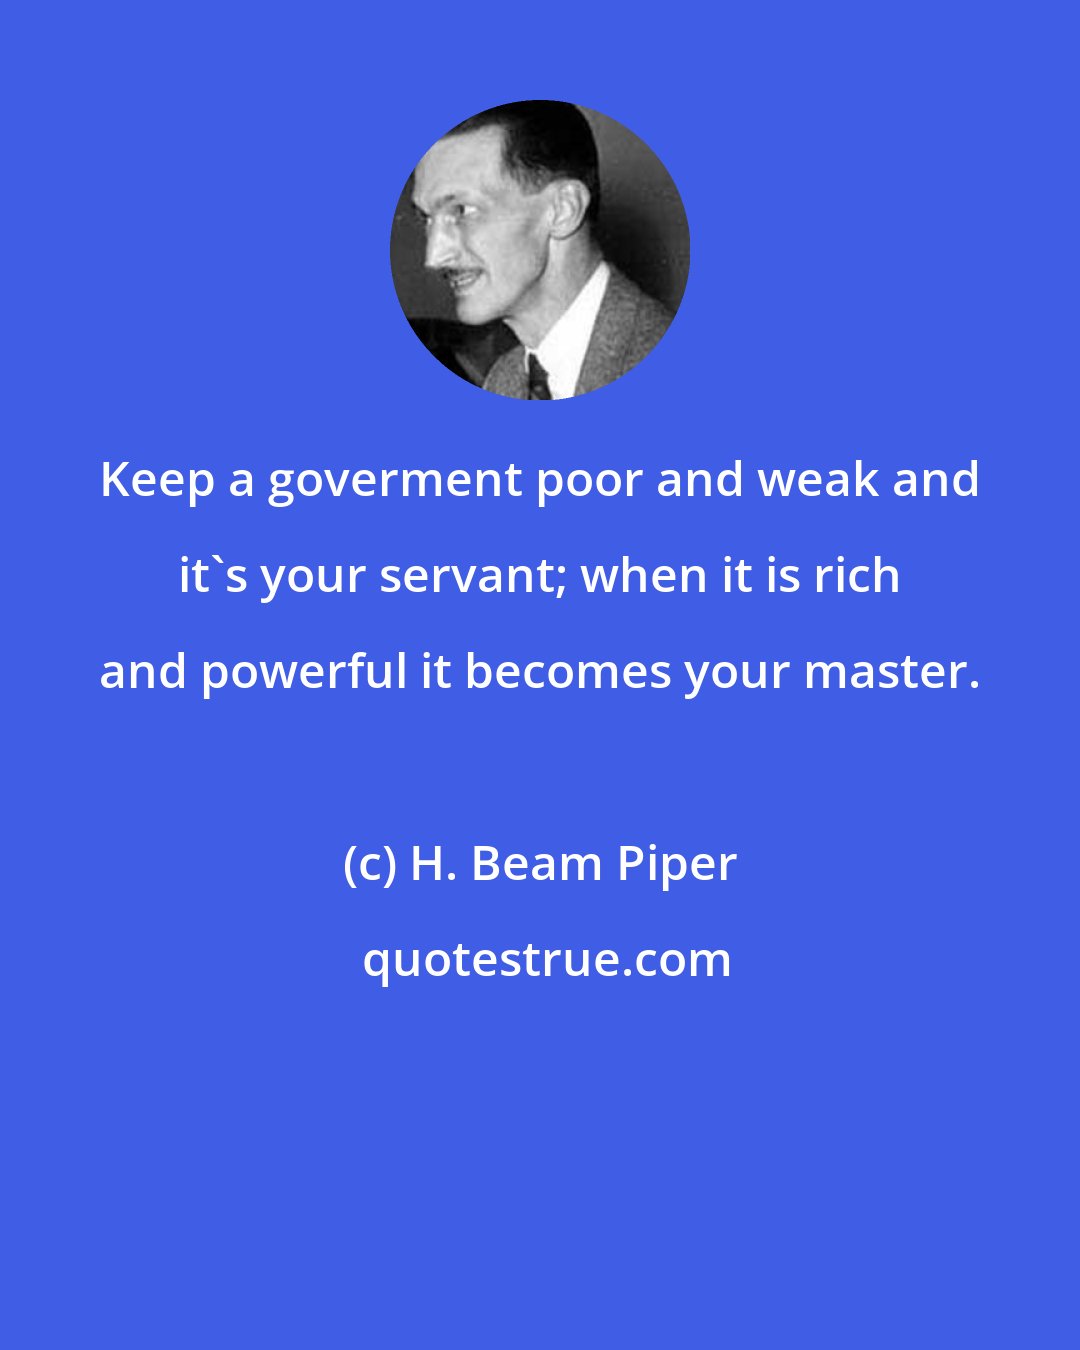 H. Beam Piper: Keep a goverment poor and weak and it's your servant; when it is rich and powerful it becomes your master.